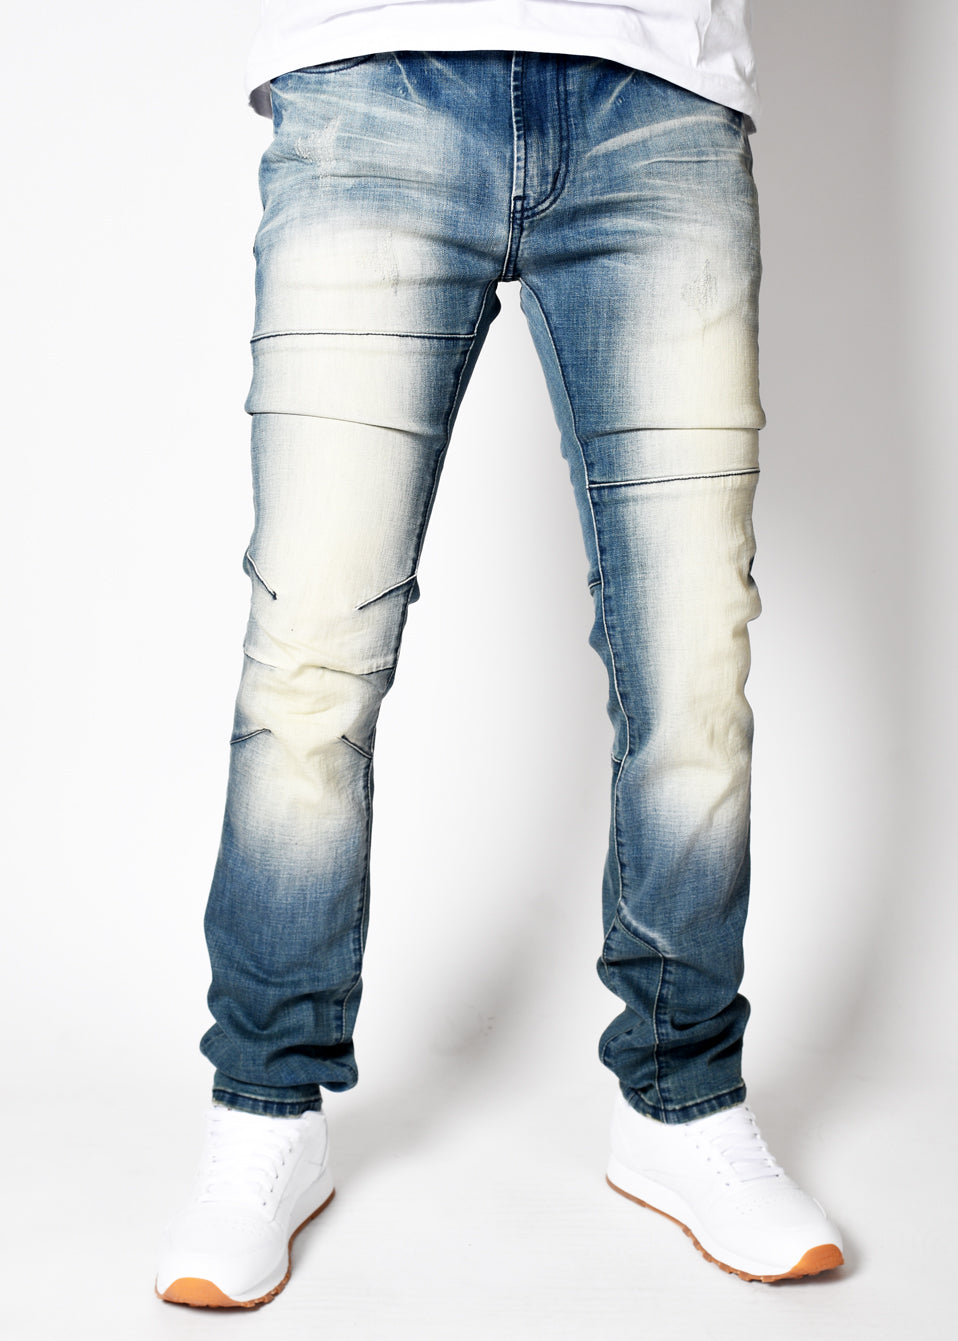 Made By History Tainted Wash Jeans By Cardenis – Cardenis Denim